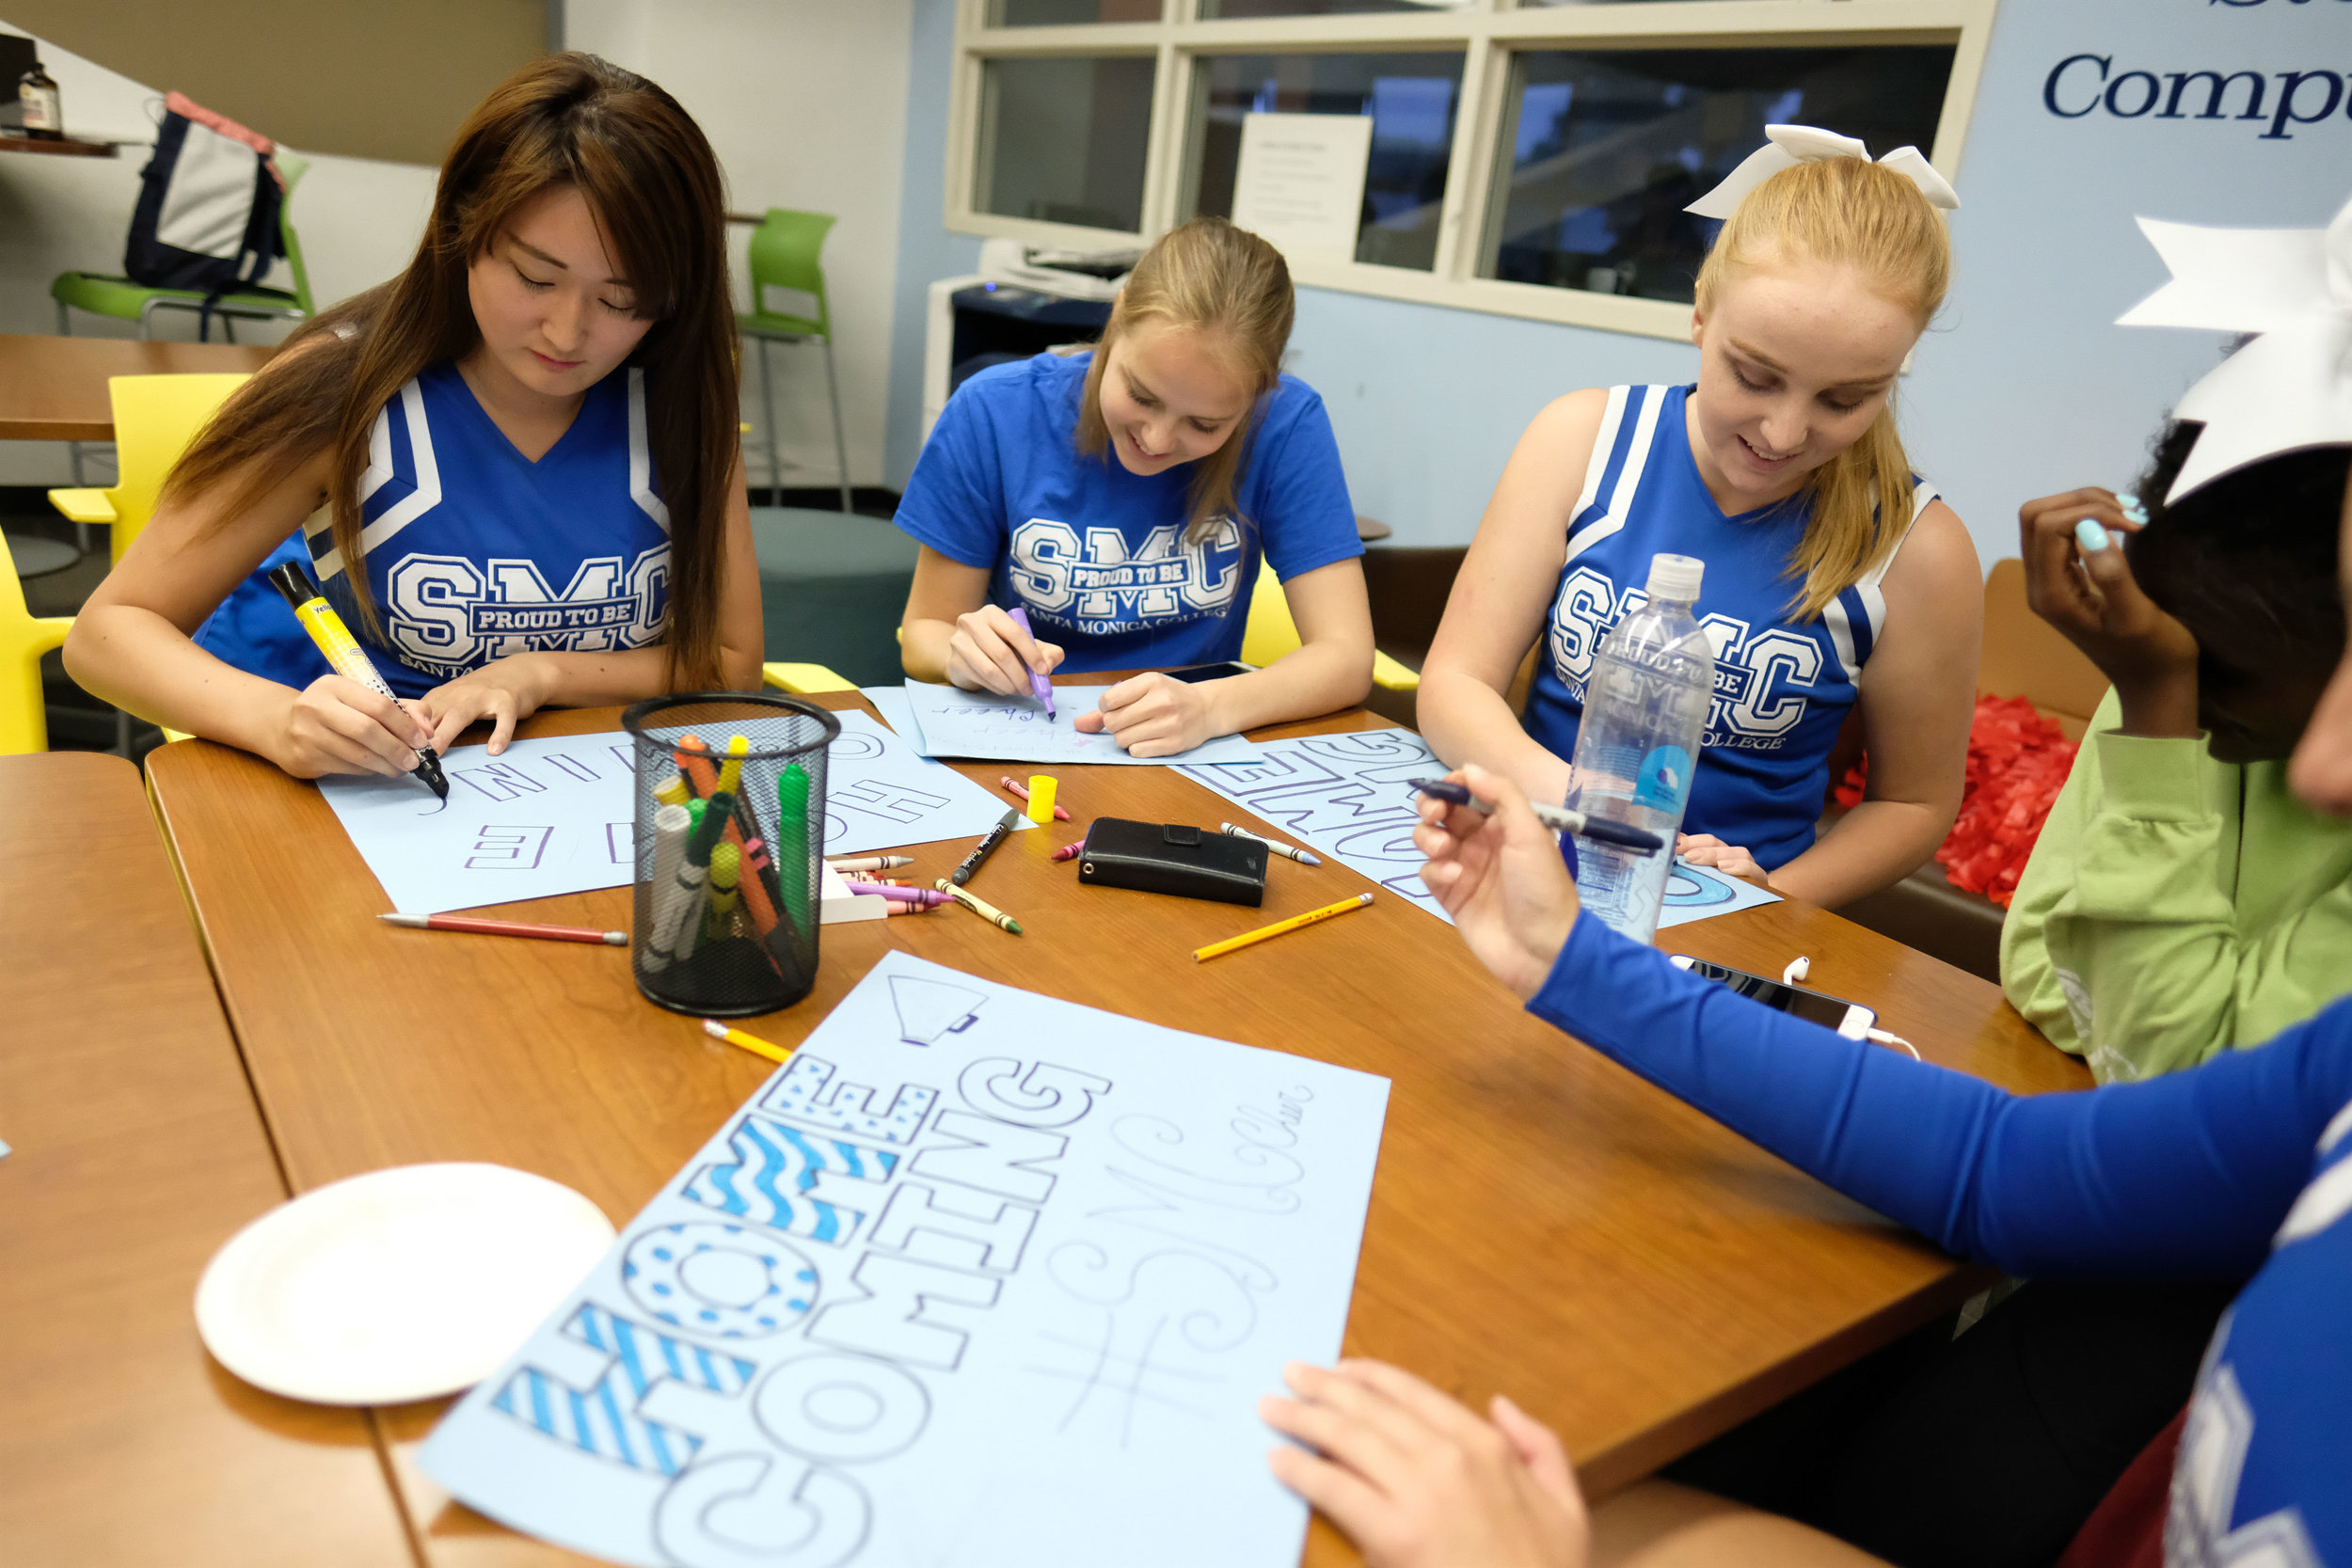  The Santa Monica Cheerleading team creating posters with Homecoming in mind for the poster contest during the Monday Night Football event for Spirit Week in Santa Monica College in Santa Monica, CALIF on October 30, 2017. (Photo by Jayrol San Jose) 